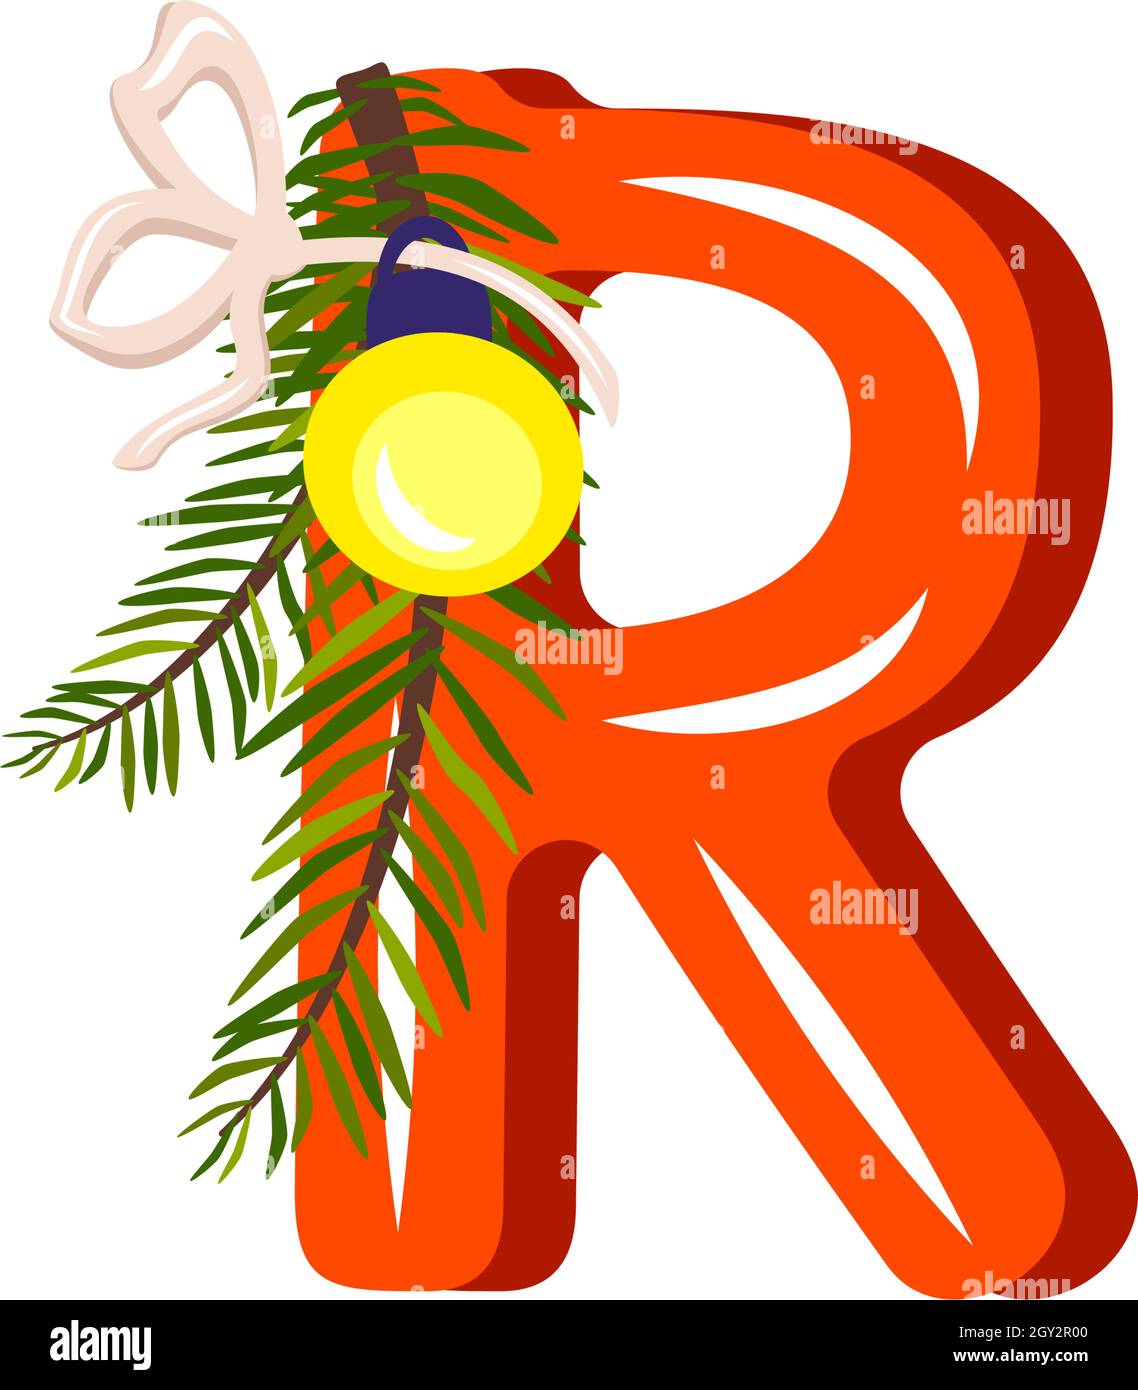 https://c8.alamy.com/comp/2GY2R00/red-letter-r-with-green-christmas-tree-branch-ball-with-bow-festive-font-for-happy-new-year-and-bright-alphabet-2GY2R00.jpg